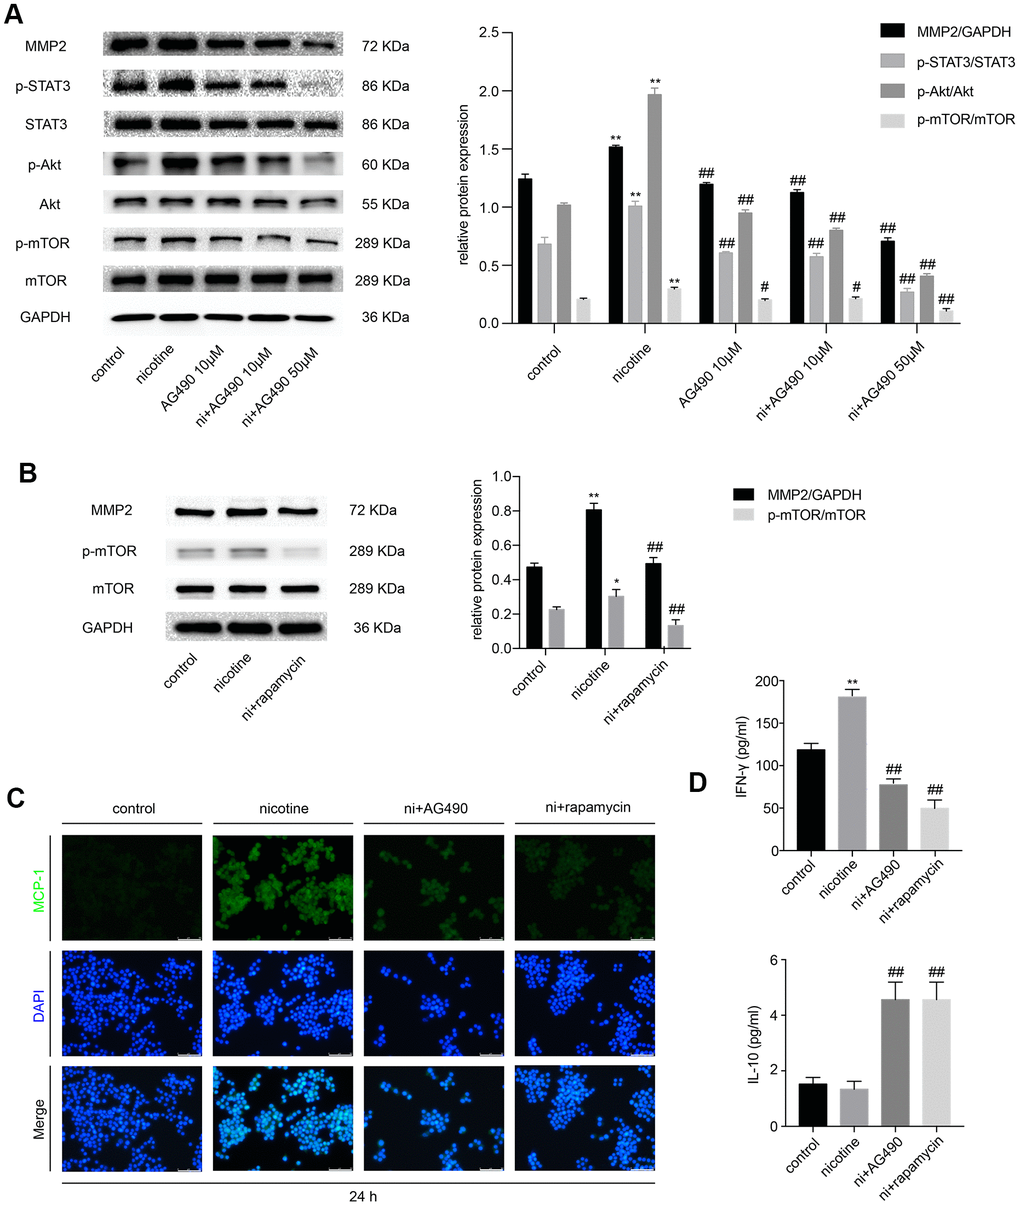 STAT3 inhibition reduces nicotine-induced inflammation in RAW264.7 cells via the Akt/mTOR/MMP2 pathway. (A) The effect of AG490 on the nicotine-induced activation of STAT3, Akt, and mTOR and the upregulation of MMP2 expression in RAW264.7 cells. (B) The effect of rapamycin on the nicotine-induced upregulation of MMP2. (C) The regulation of nicotine-induced MCP-1 expression by STAT3 and rapamycin inhibition, as detected by immunofluorescence. Magnification, 200×; bars, 100 μm. (D) ELISA was used to detect IFN-γ and IL-10 released by RAW264.7 cells upon treatment with nicotine, AG490 and rapamycin. Ni, nicotine. The data were presented as the mean ± SD. *p p vs. the control group. #p p vs. the nicotine group. Each experiment was performed three times.